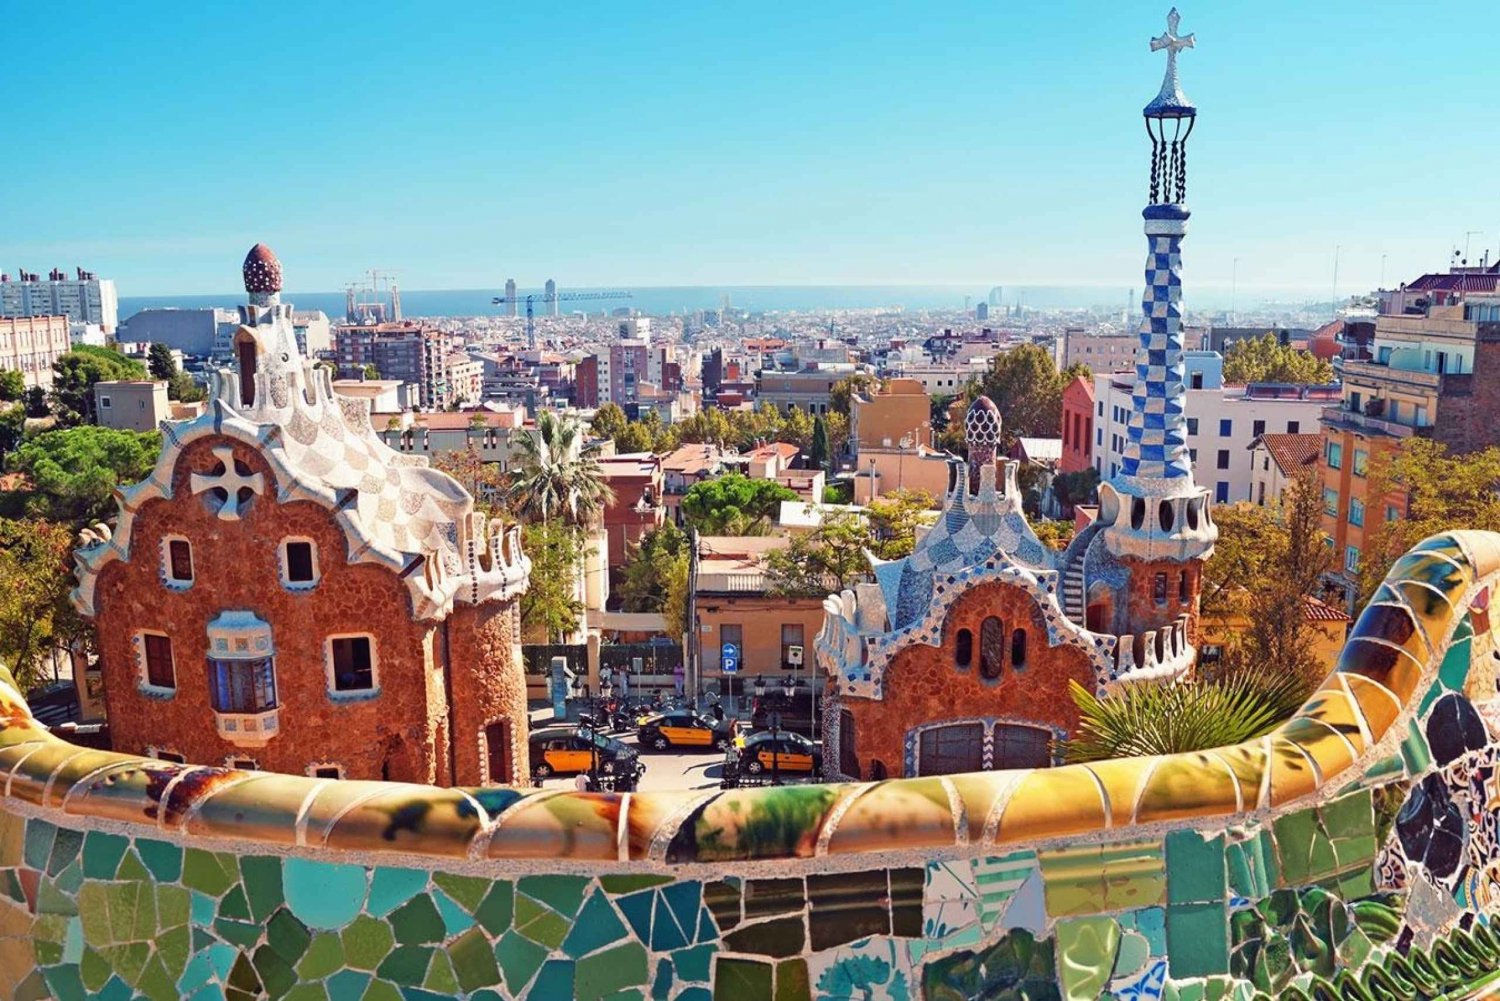 Barcelona Audioguide - TravelMate app for your smartphone